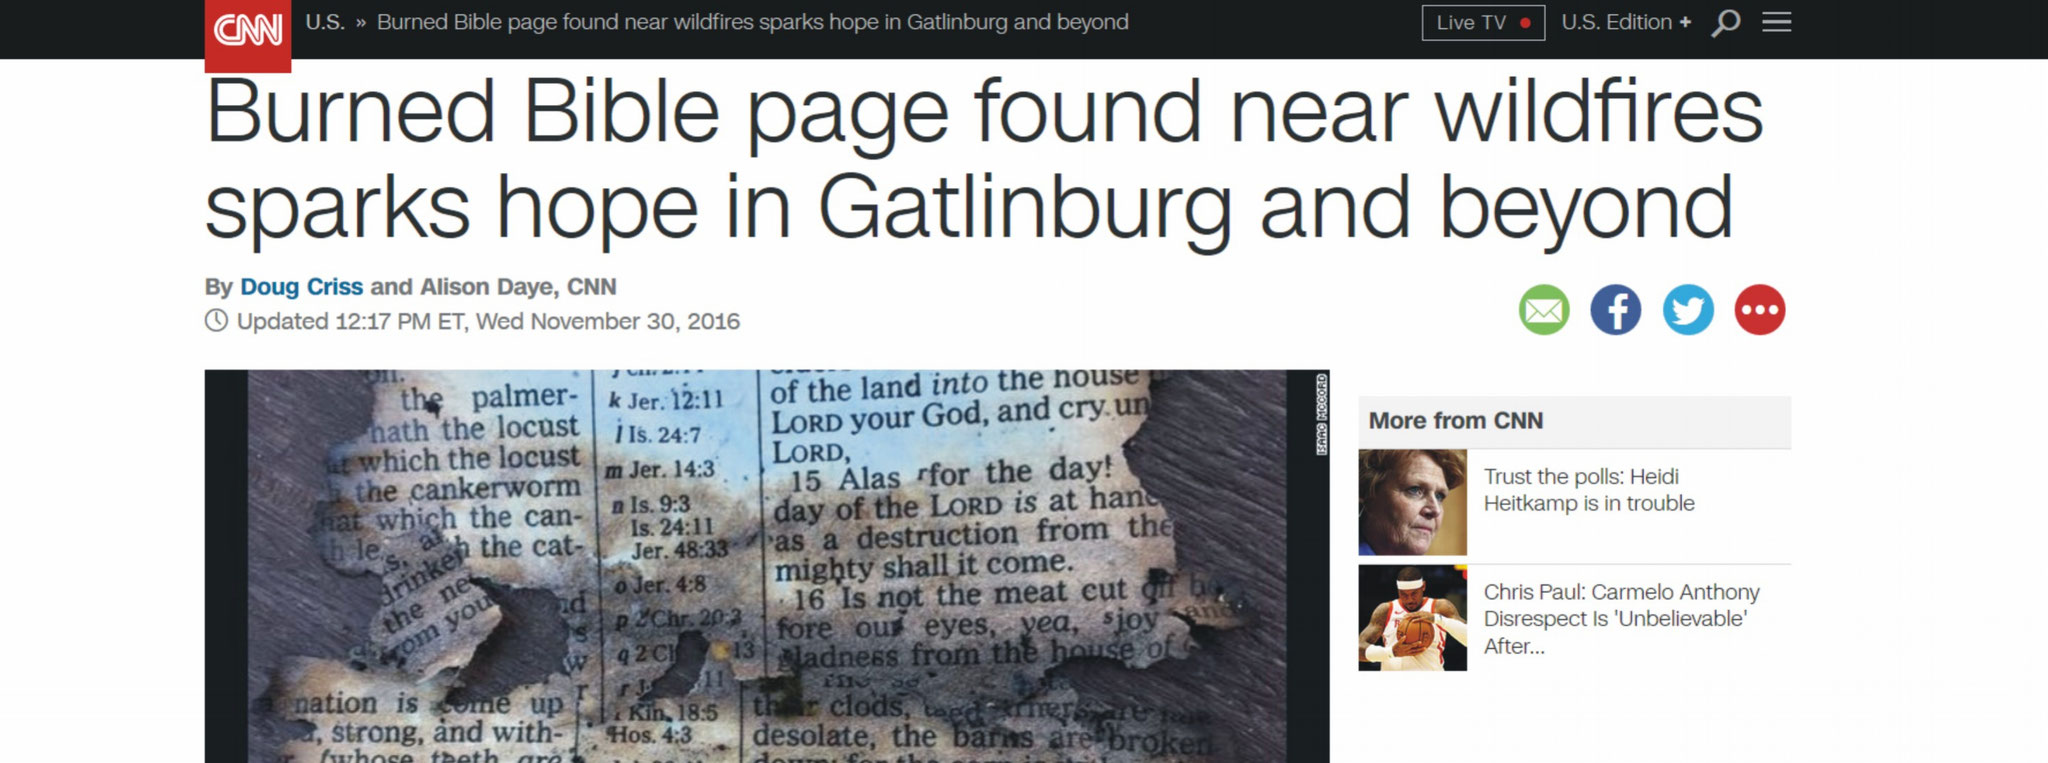 Surprising message on burned Bible page in Tenneesse